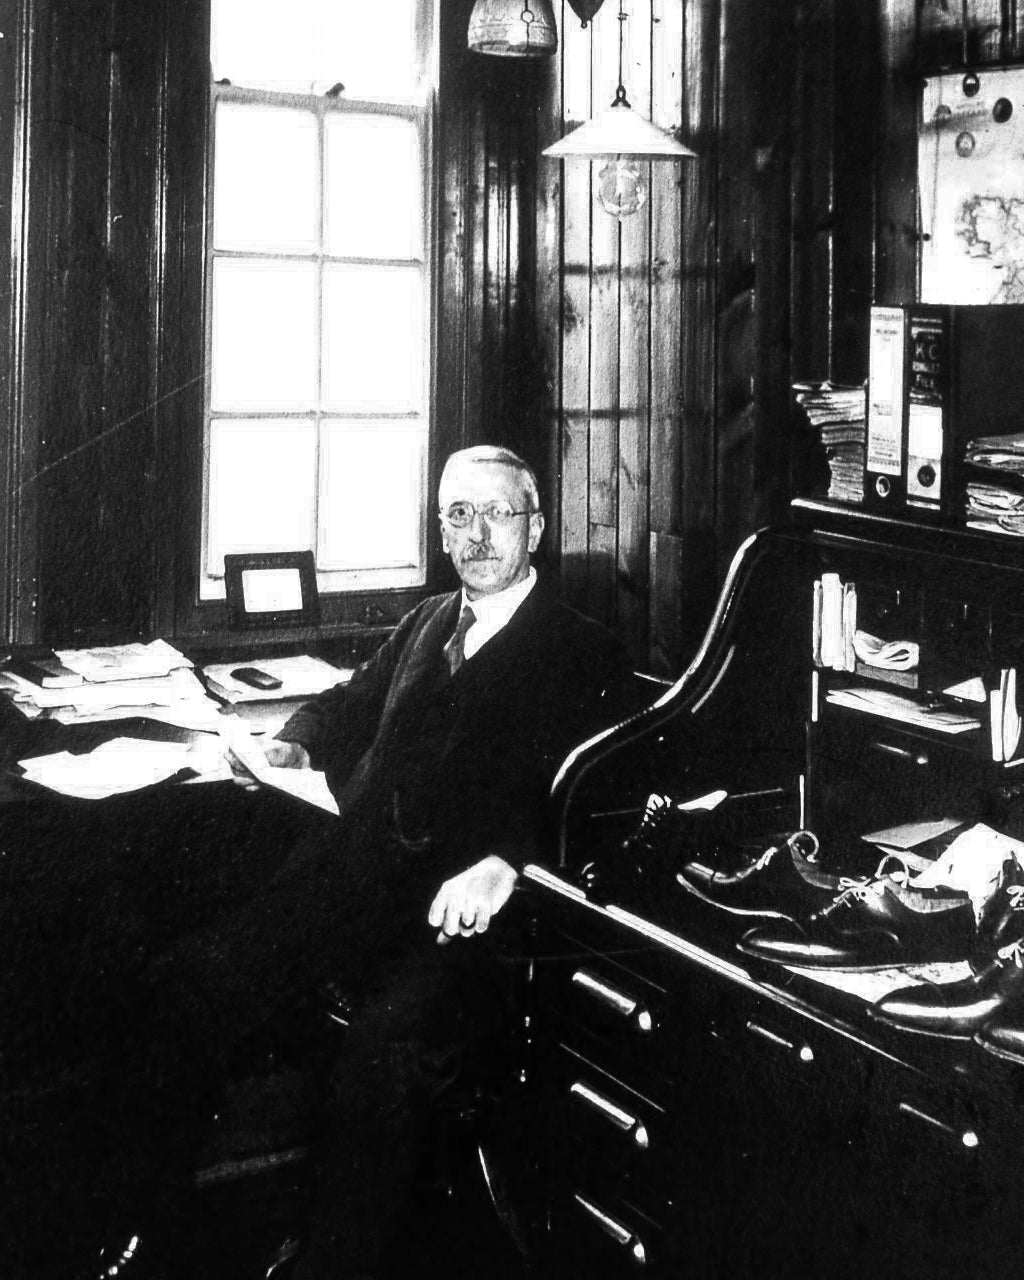 Company Founder, George James Cox